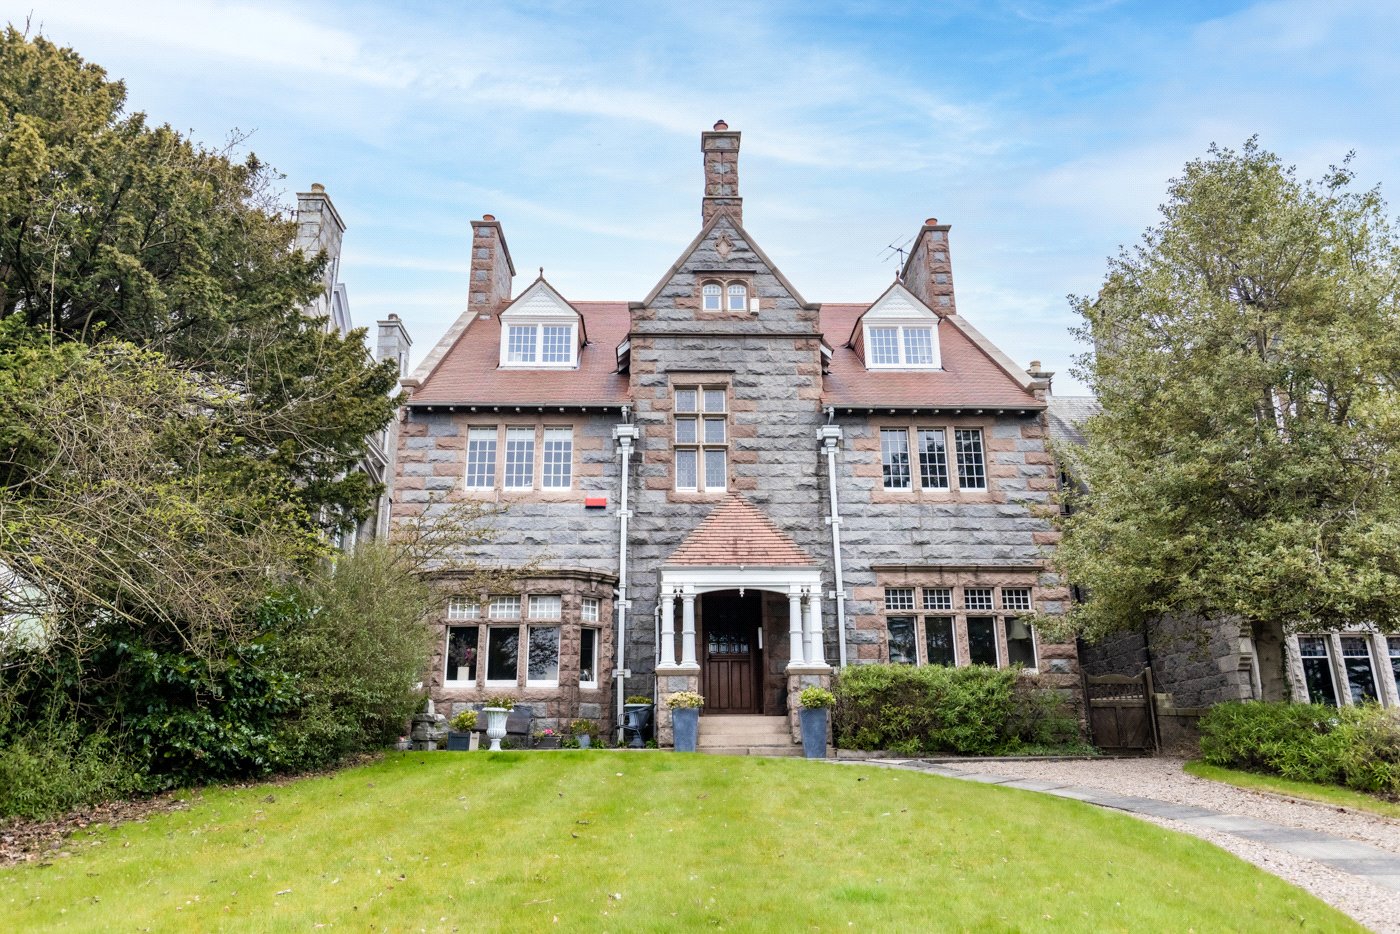 Our latest properties for sale or to let (17th May 2022)